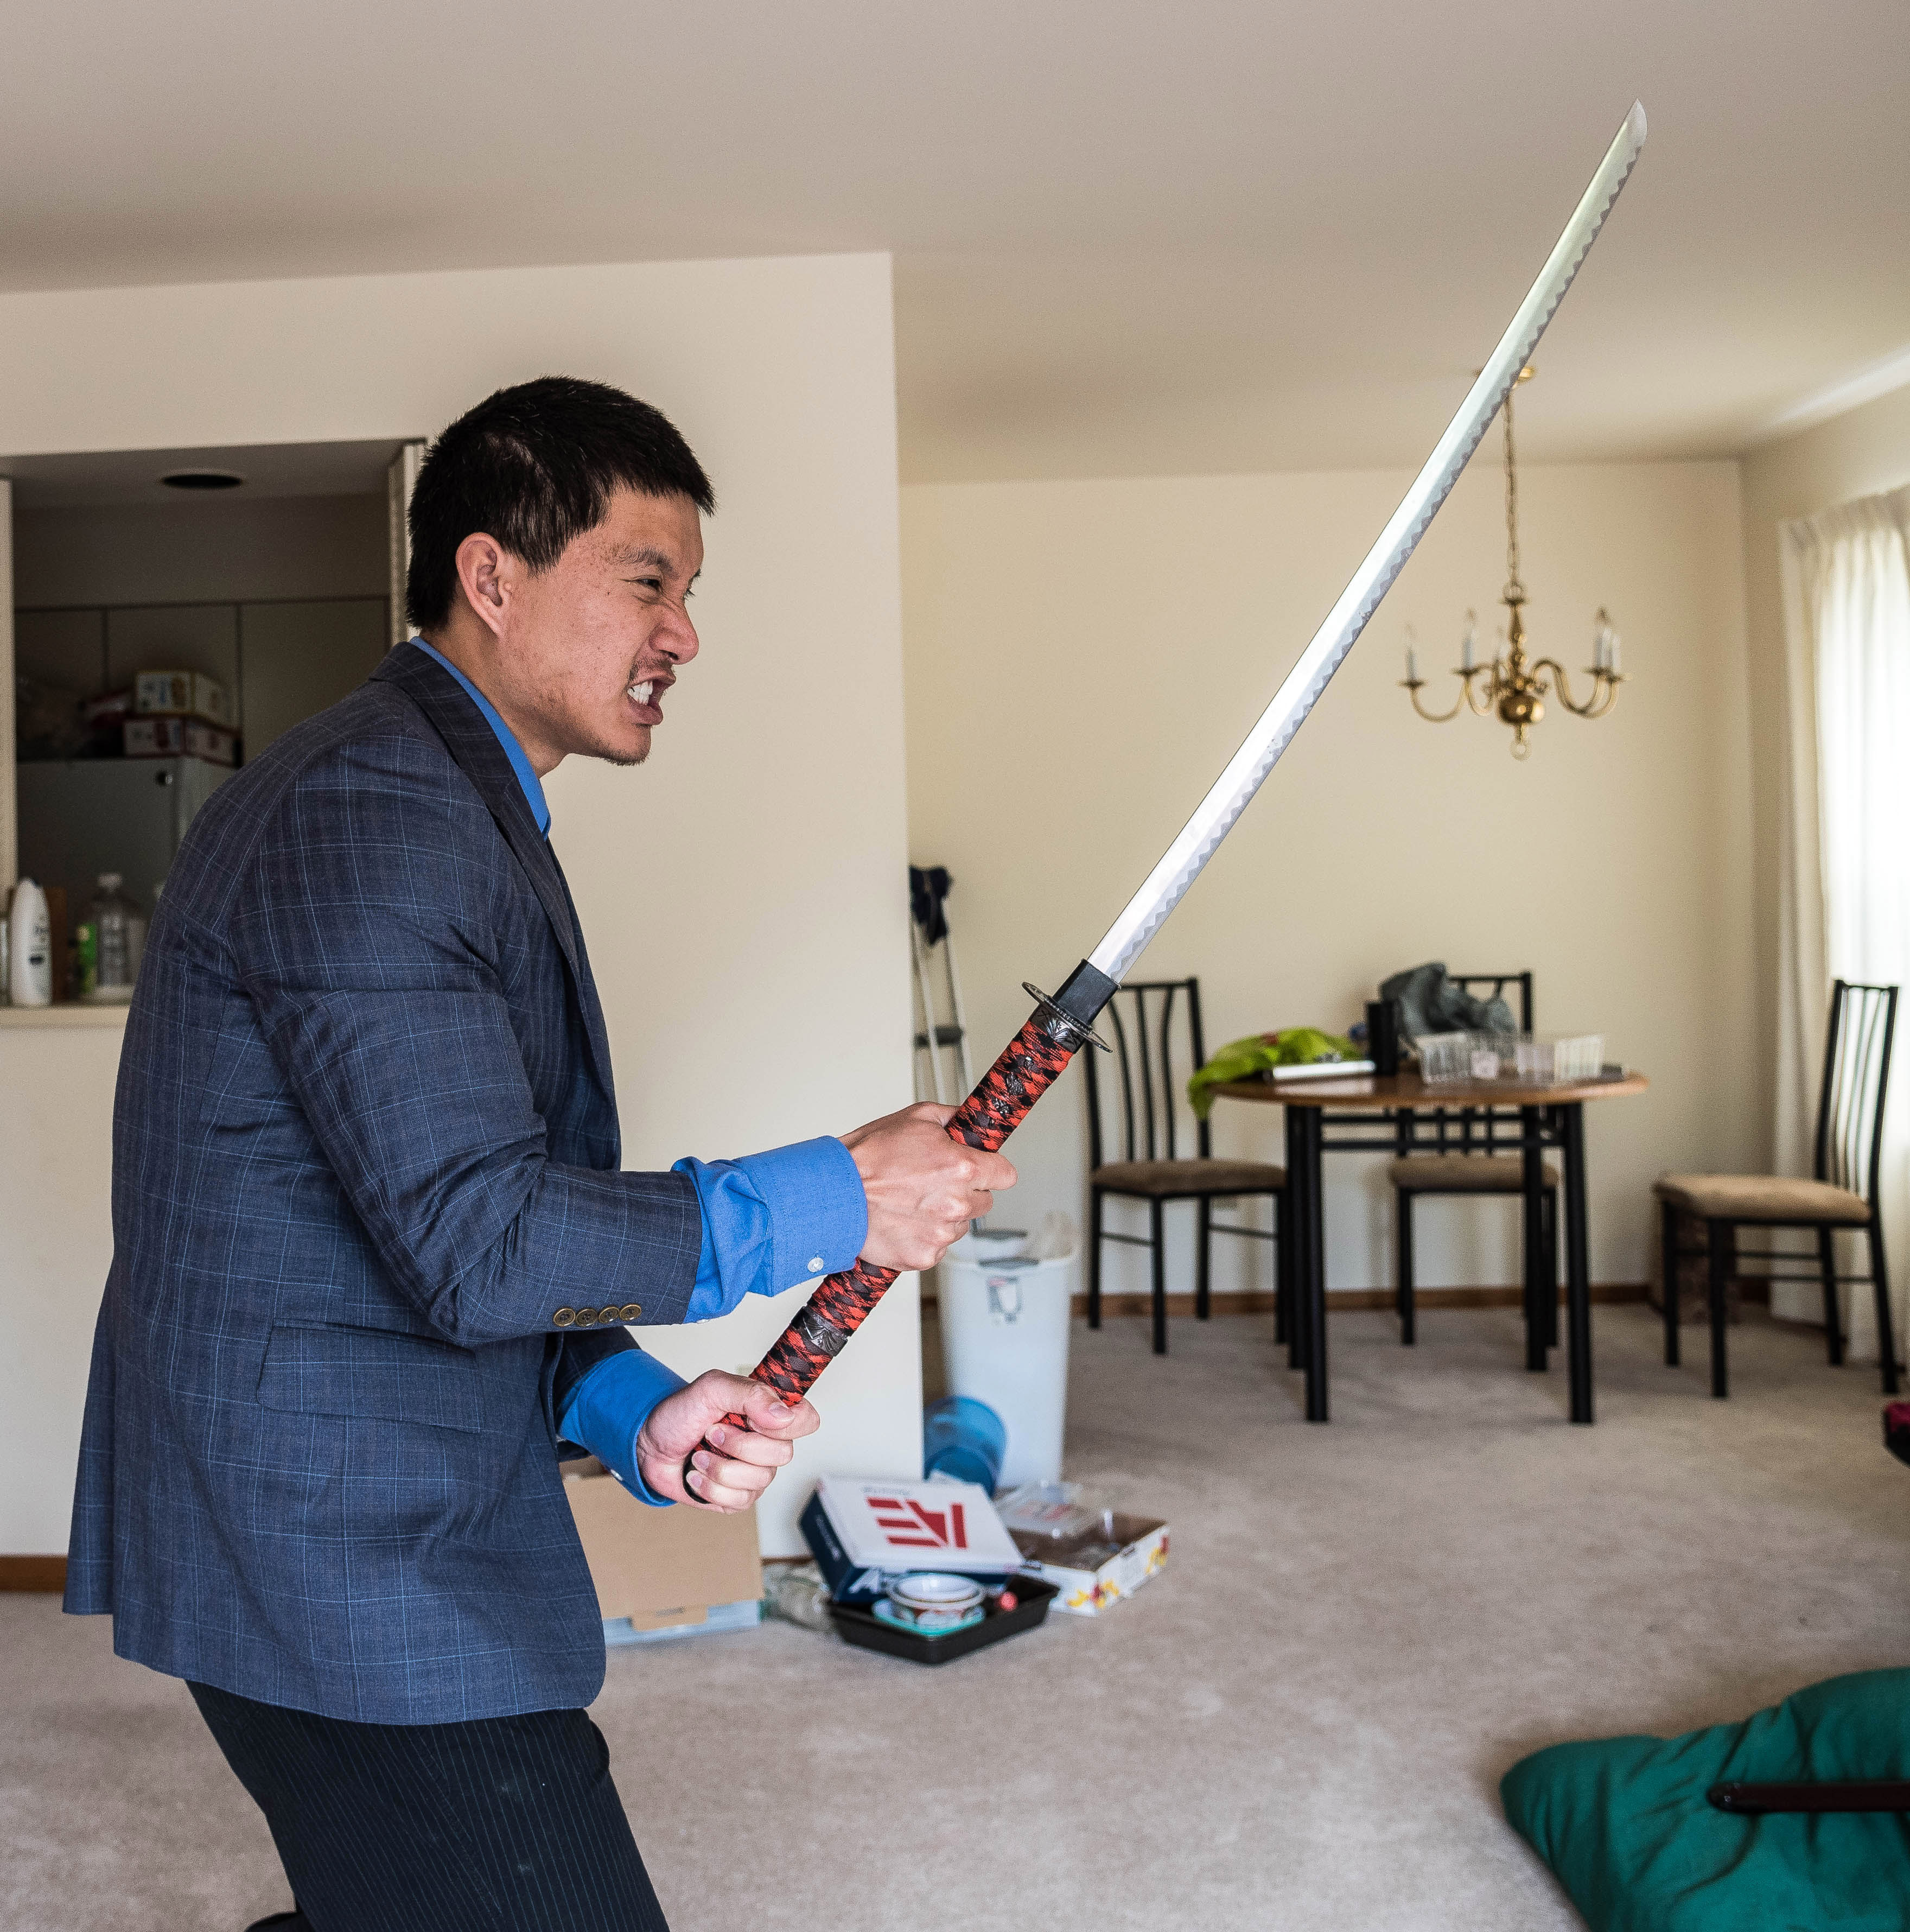 Asian man in suit about to slay an enemy image - Free stock photo ...